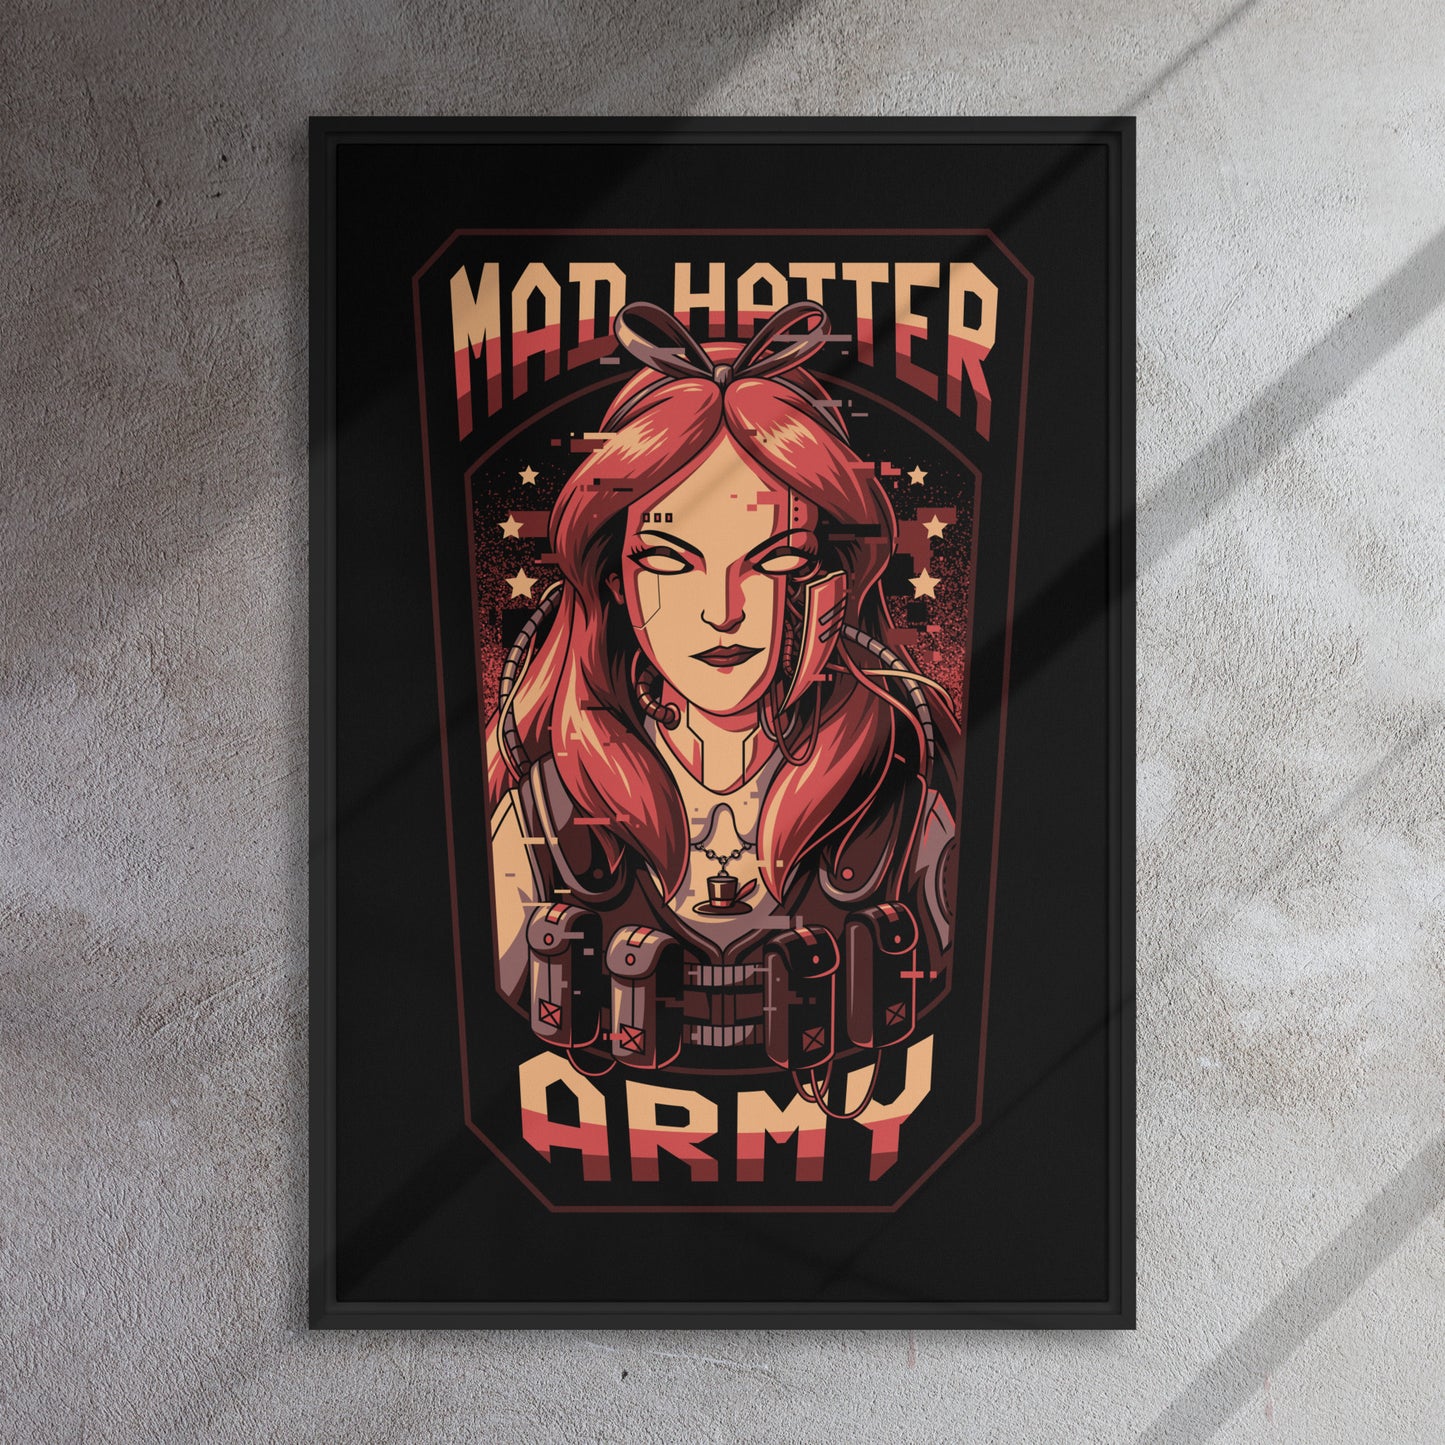 Mad Hatter Army - AL1CE mascot on a framed canvas!?!?